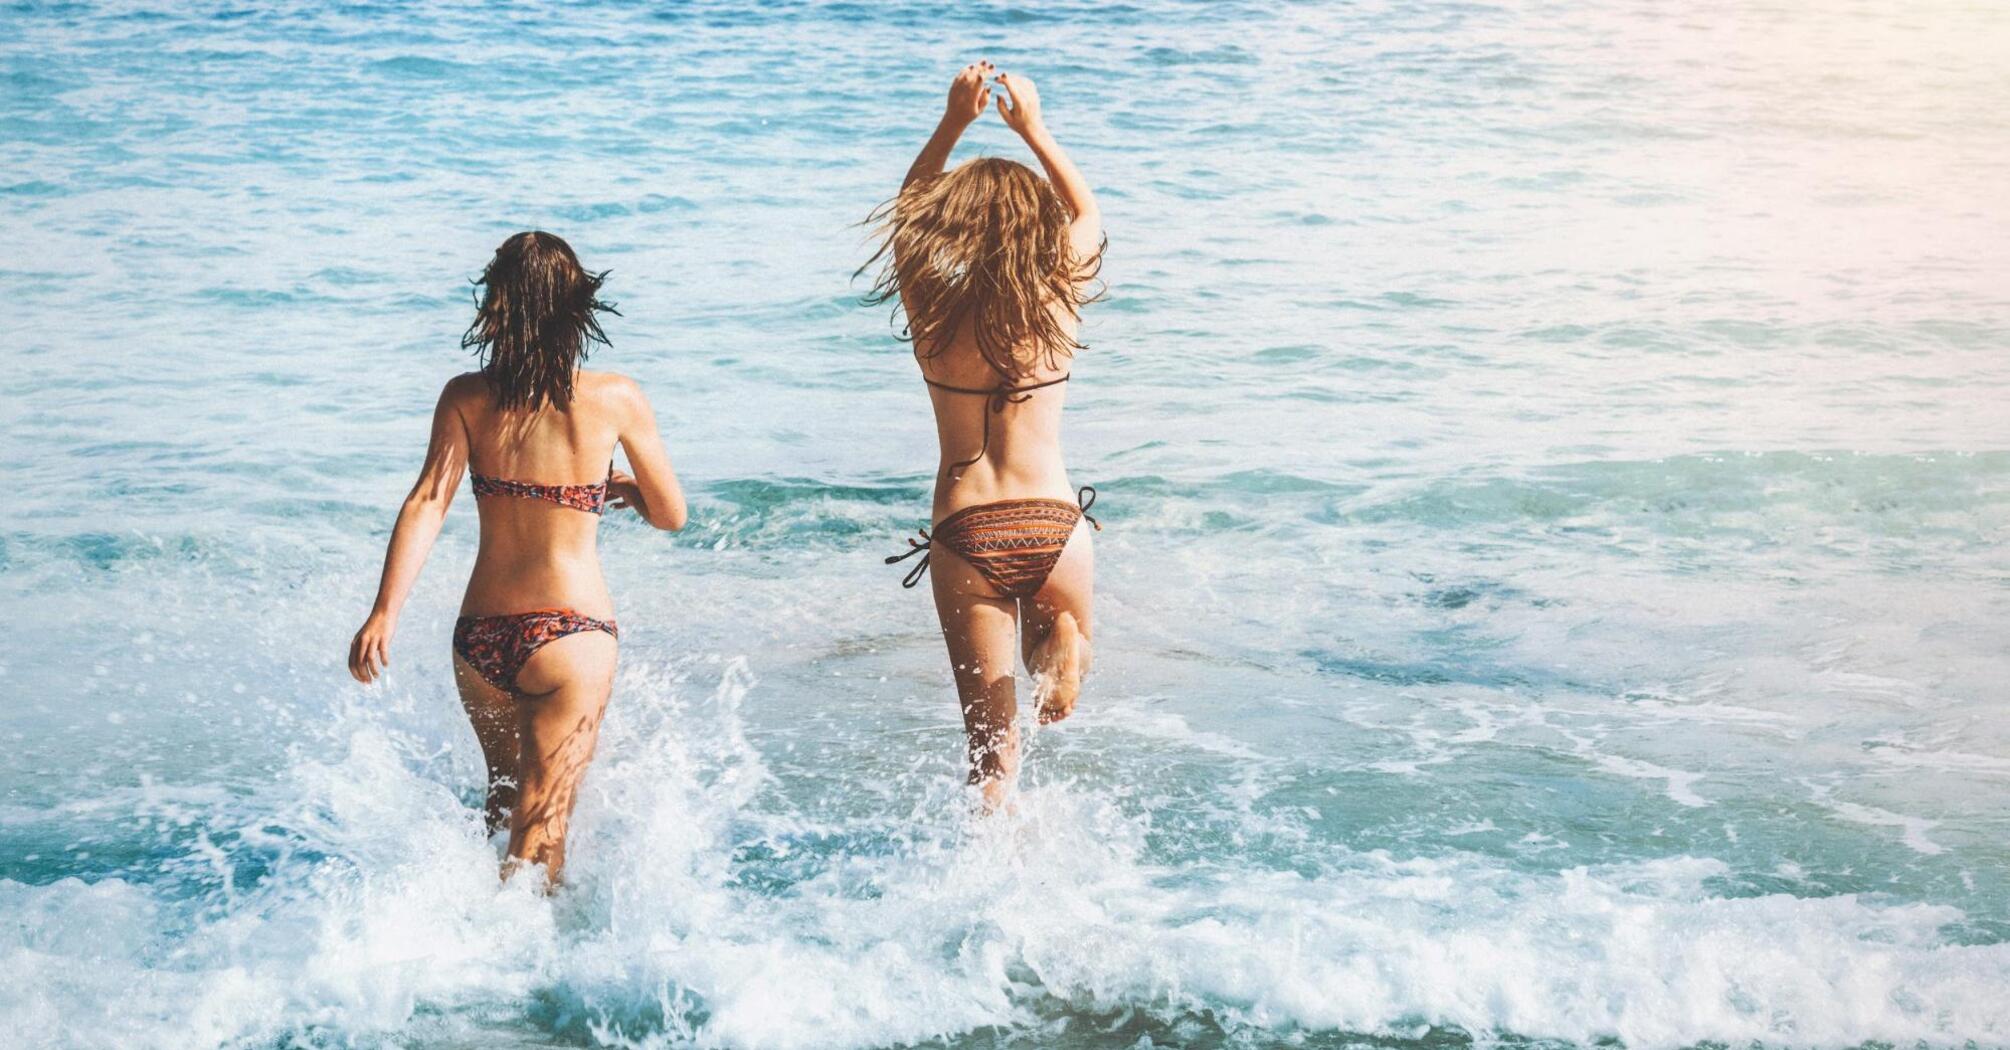 Two girls are swimming on the beach